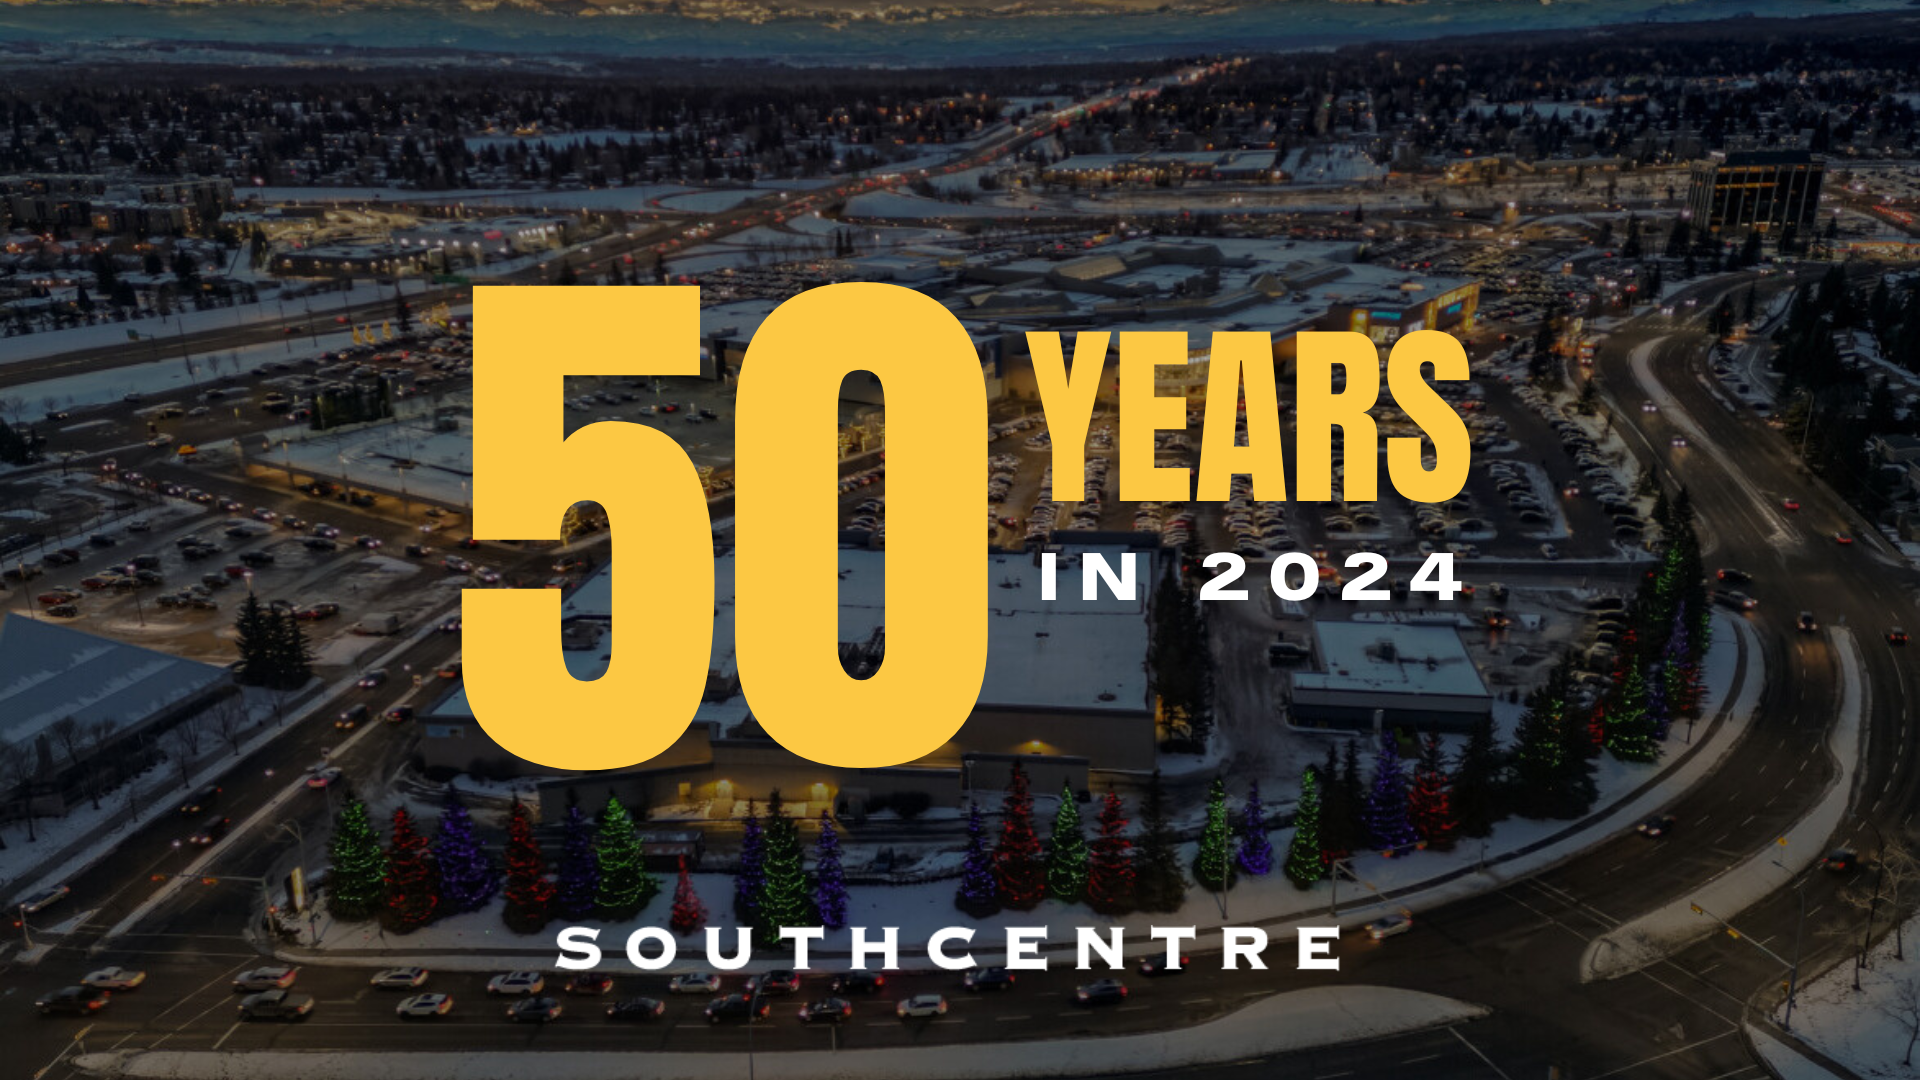 Southcentre 50 Years in 2024